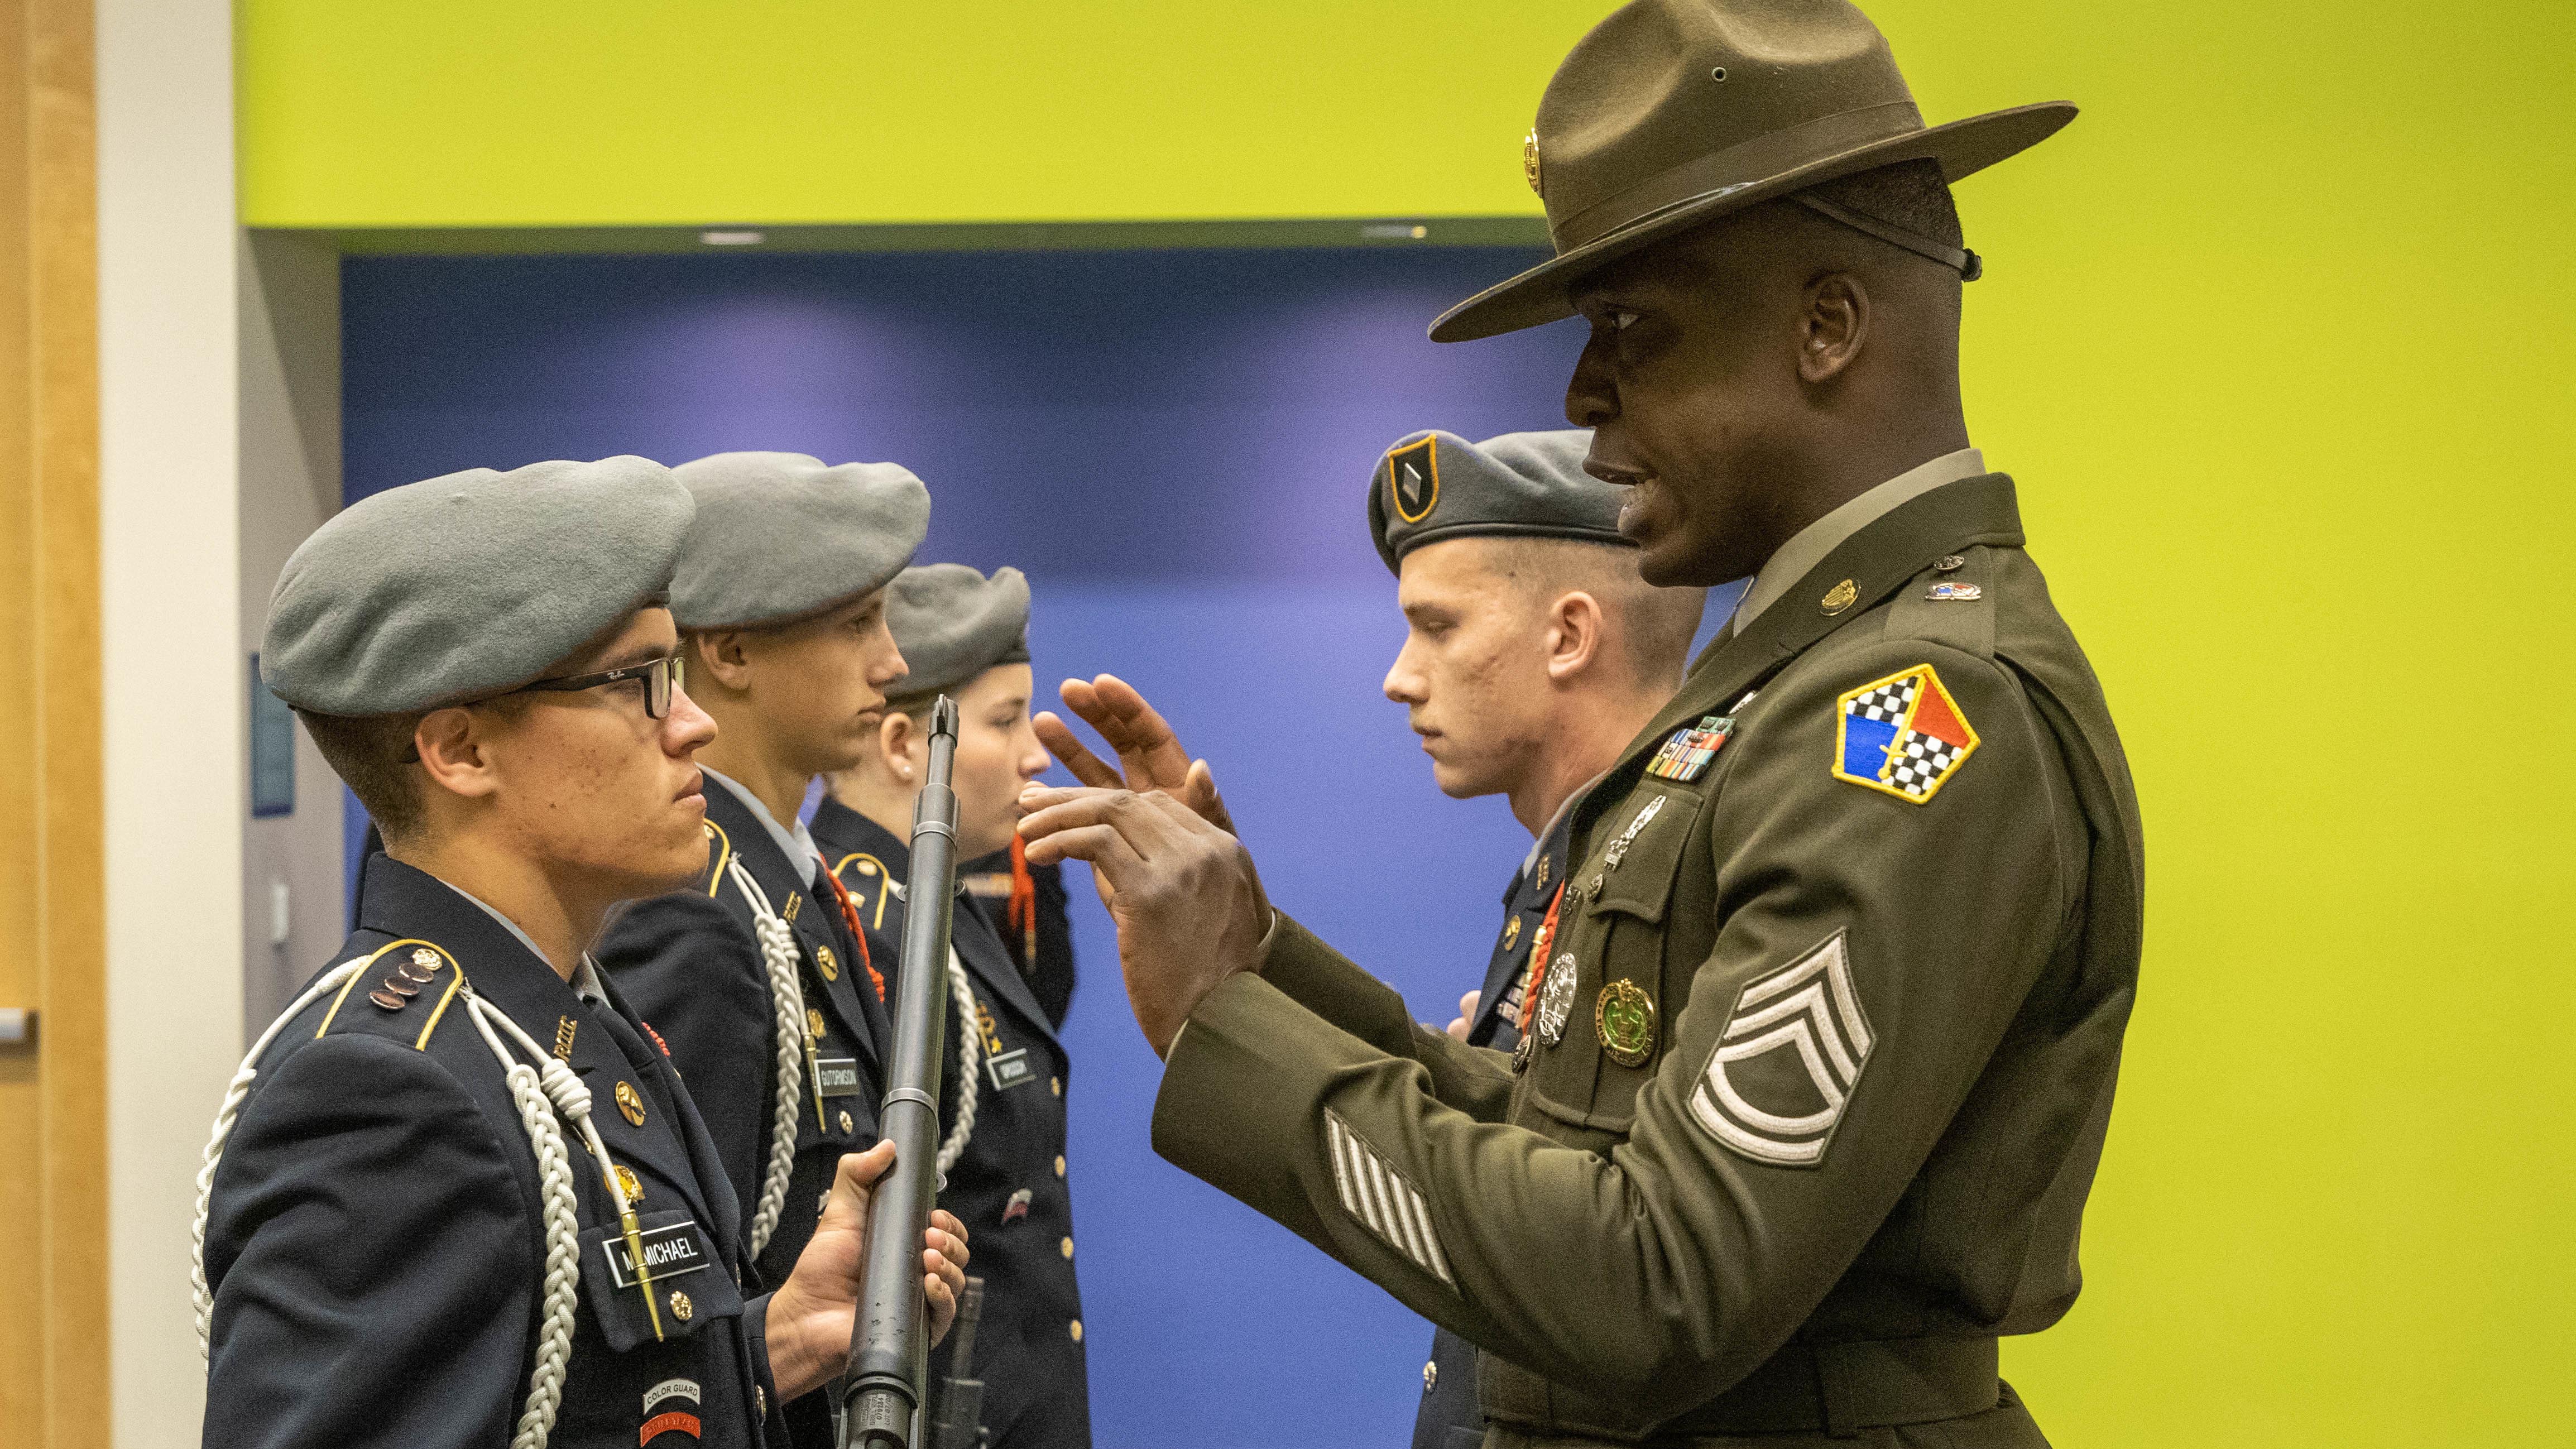 A drill sergeant inspects a junior ROTC member's rifle.